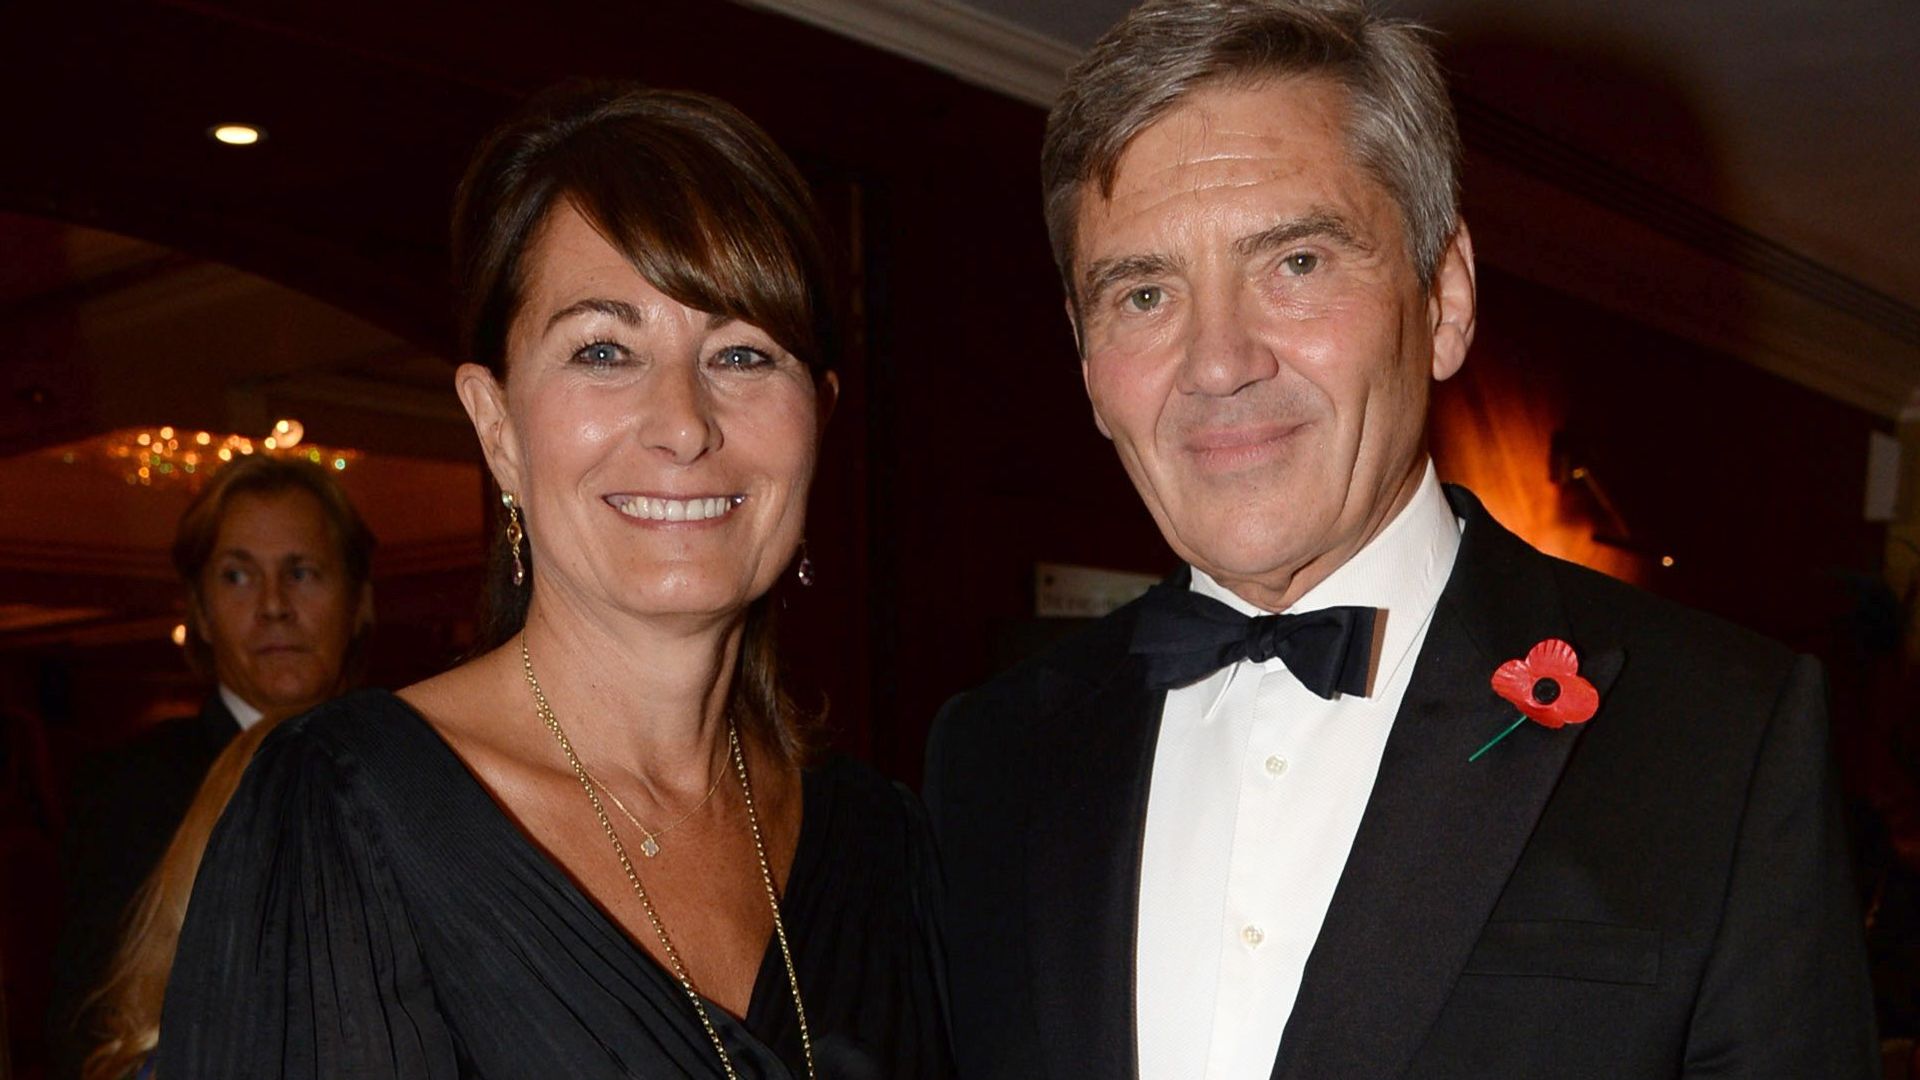 Carole Middleton undergoes Hollywood transformation in rarely-pictured second mother-of-the-bride dress